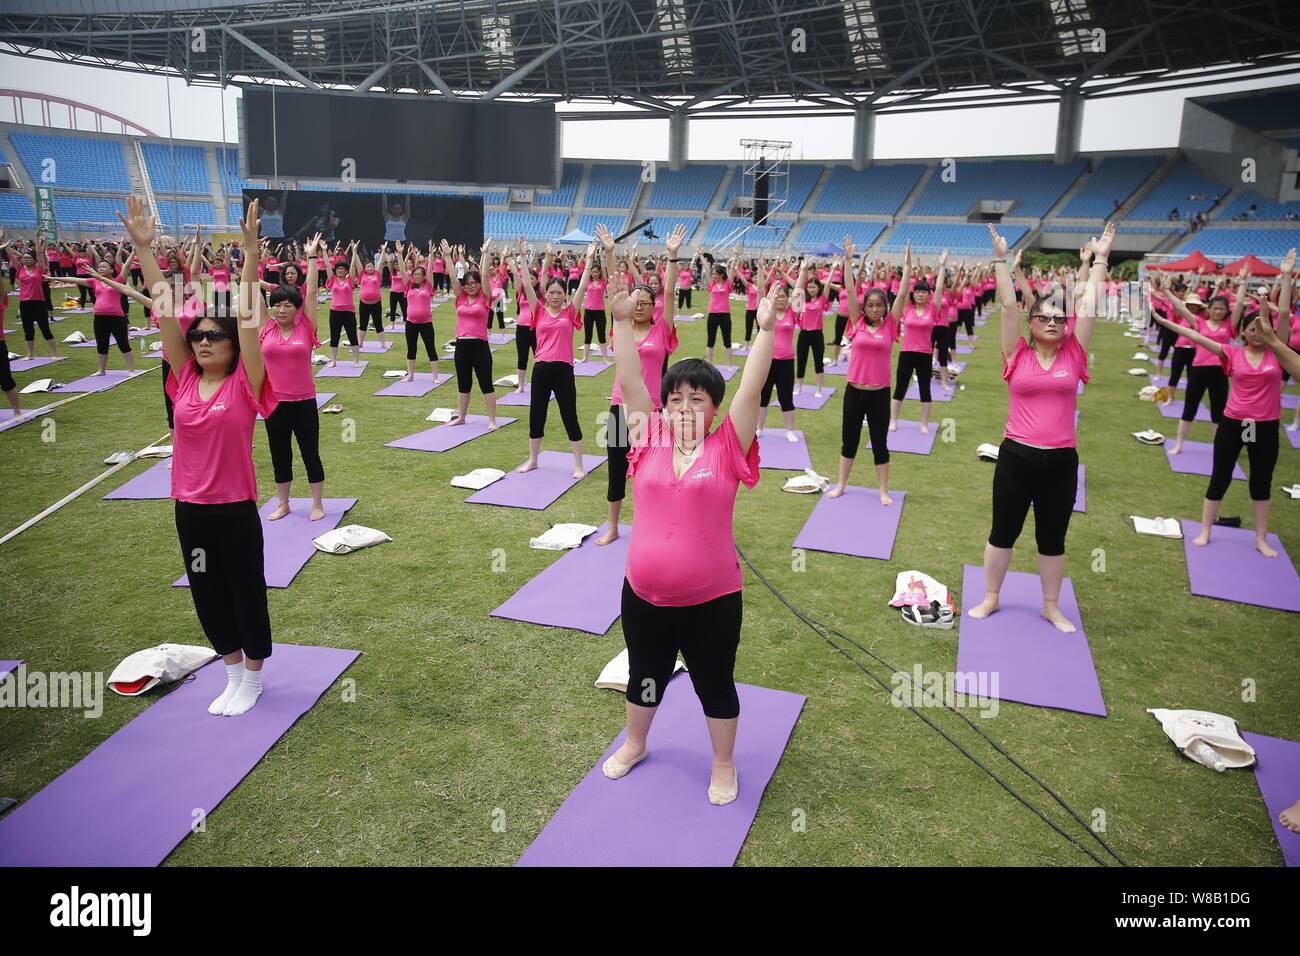 https://c8.alamy.com/comp/W8B1DG/pregnant-women-practise-yoga-to-set-a-new-guinness-world-record-for-the-largest-prenatal-yoga-class-at-a-stadium-in-hefei-city-east-chinas-anhui-pro-W8B1DG.jpg